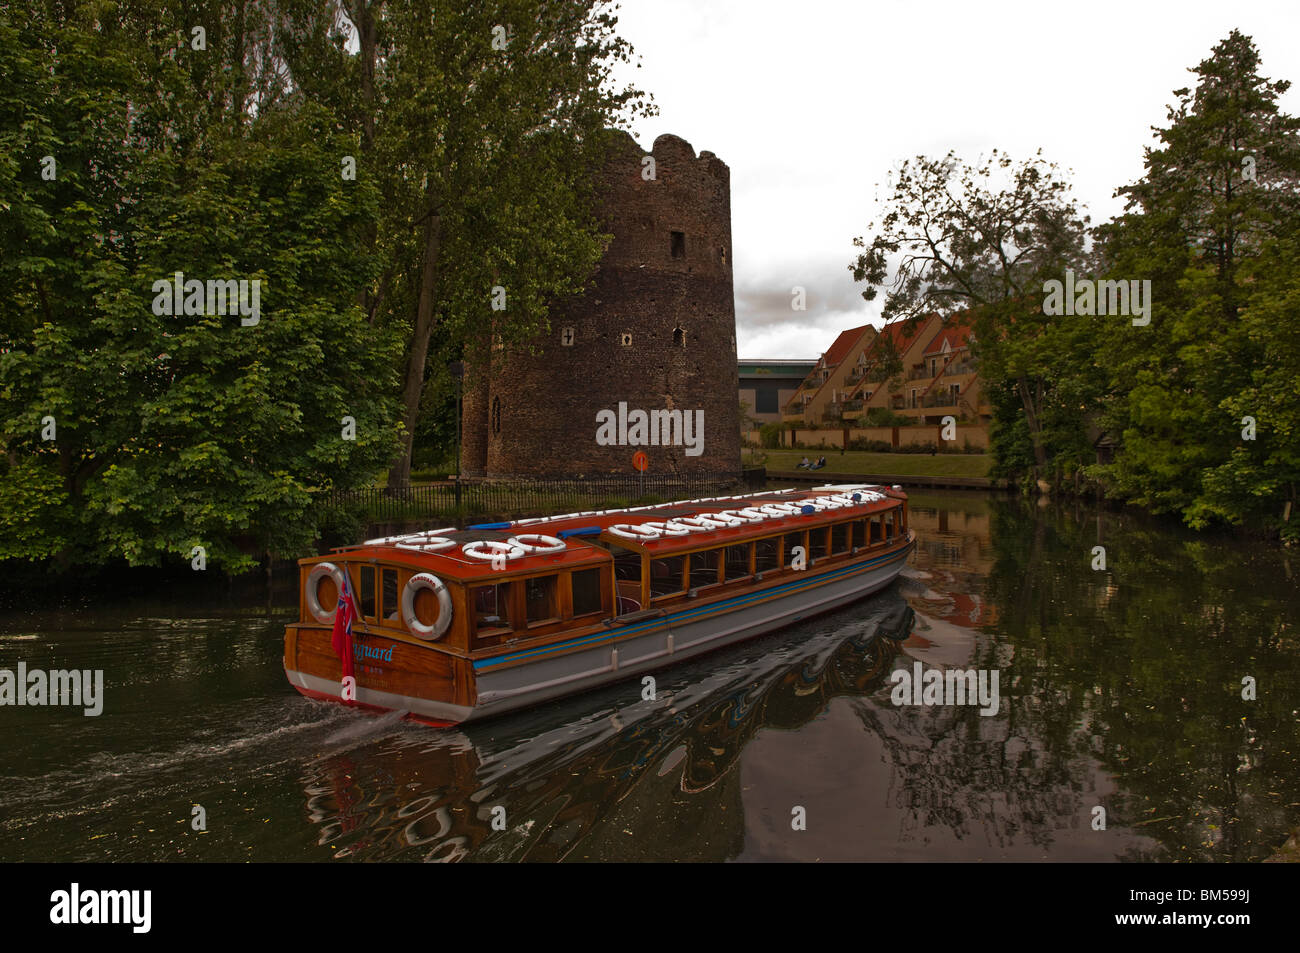 Pleasure boat on the fenland waters in Norwich adjacent to the old city walls, Stock Photo